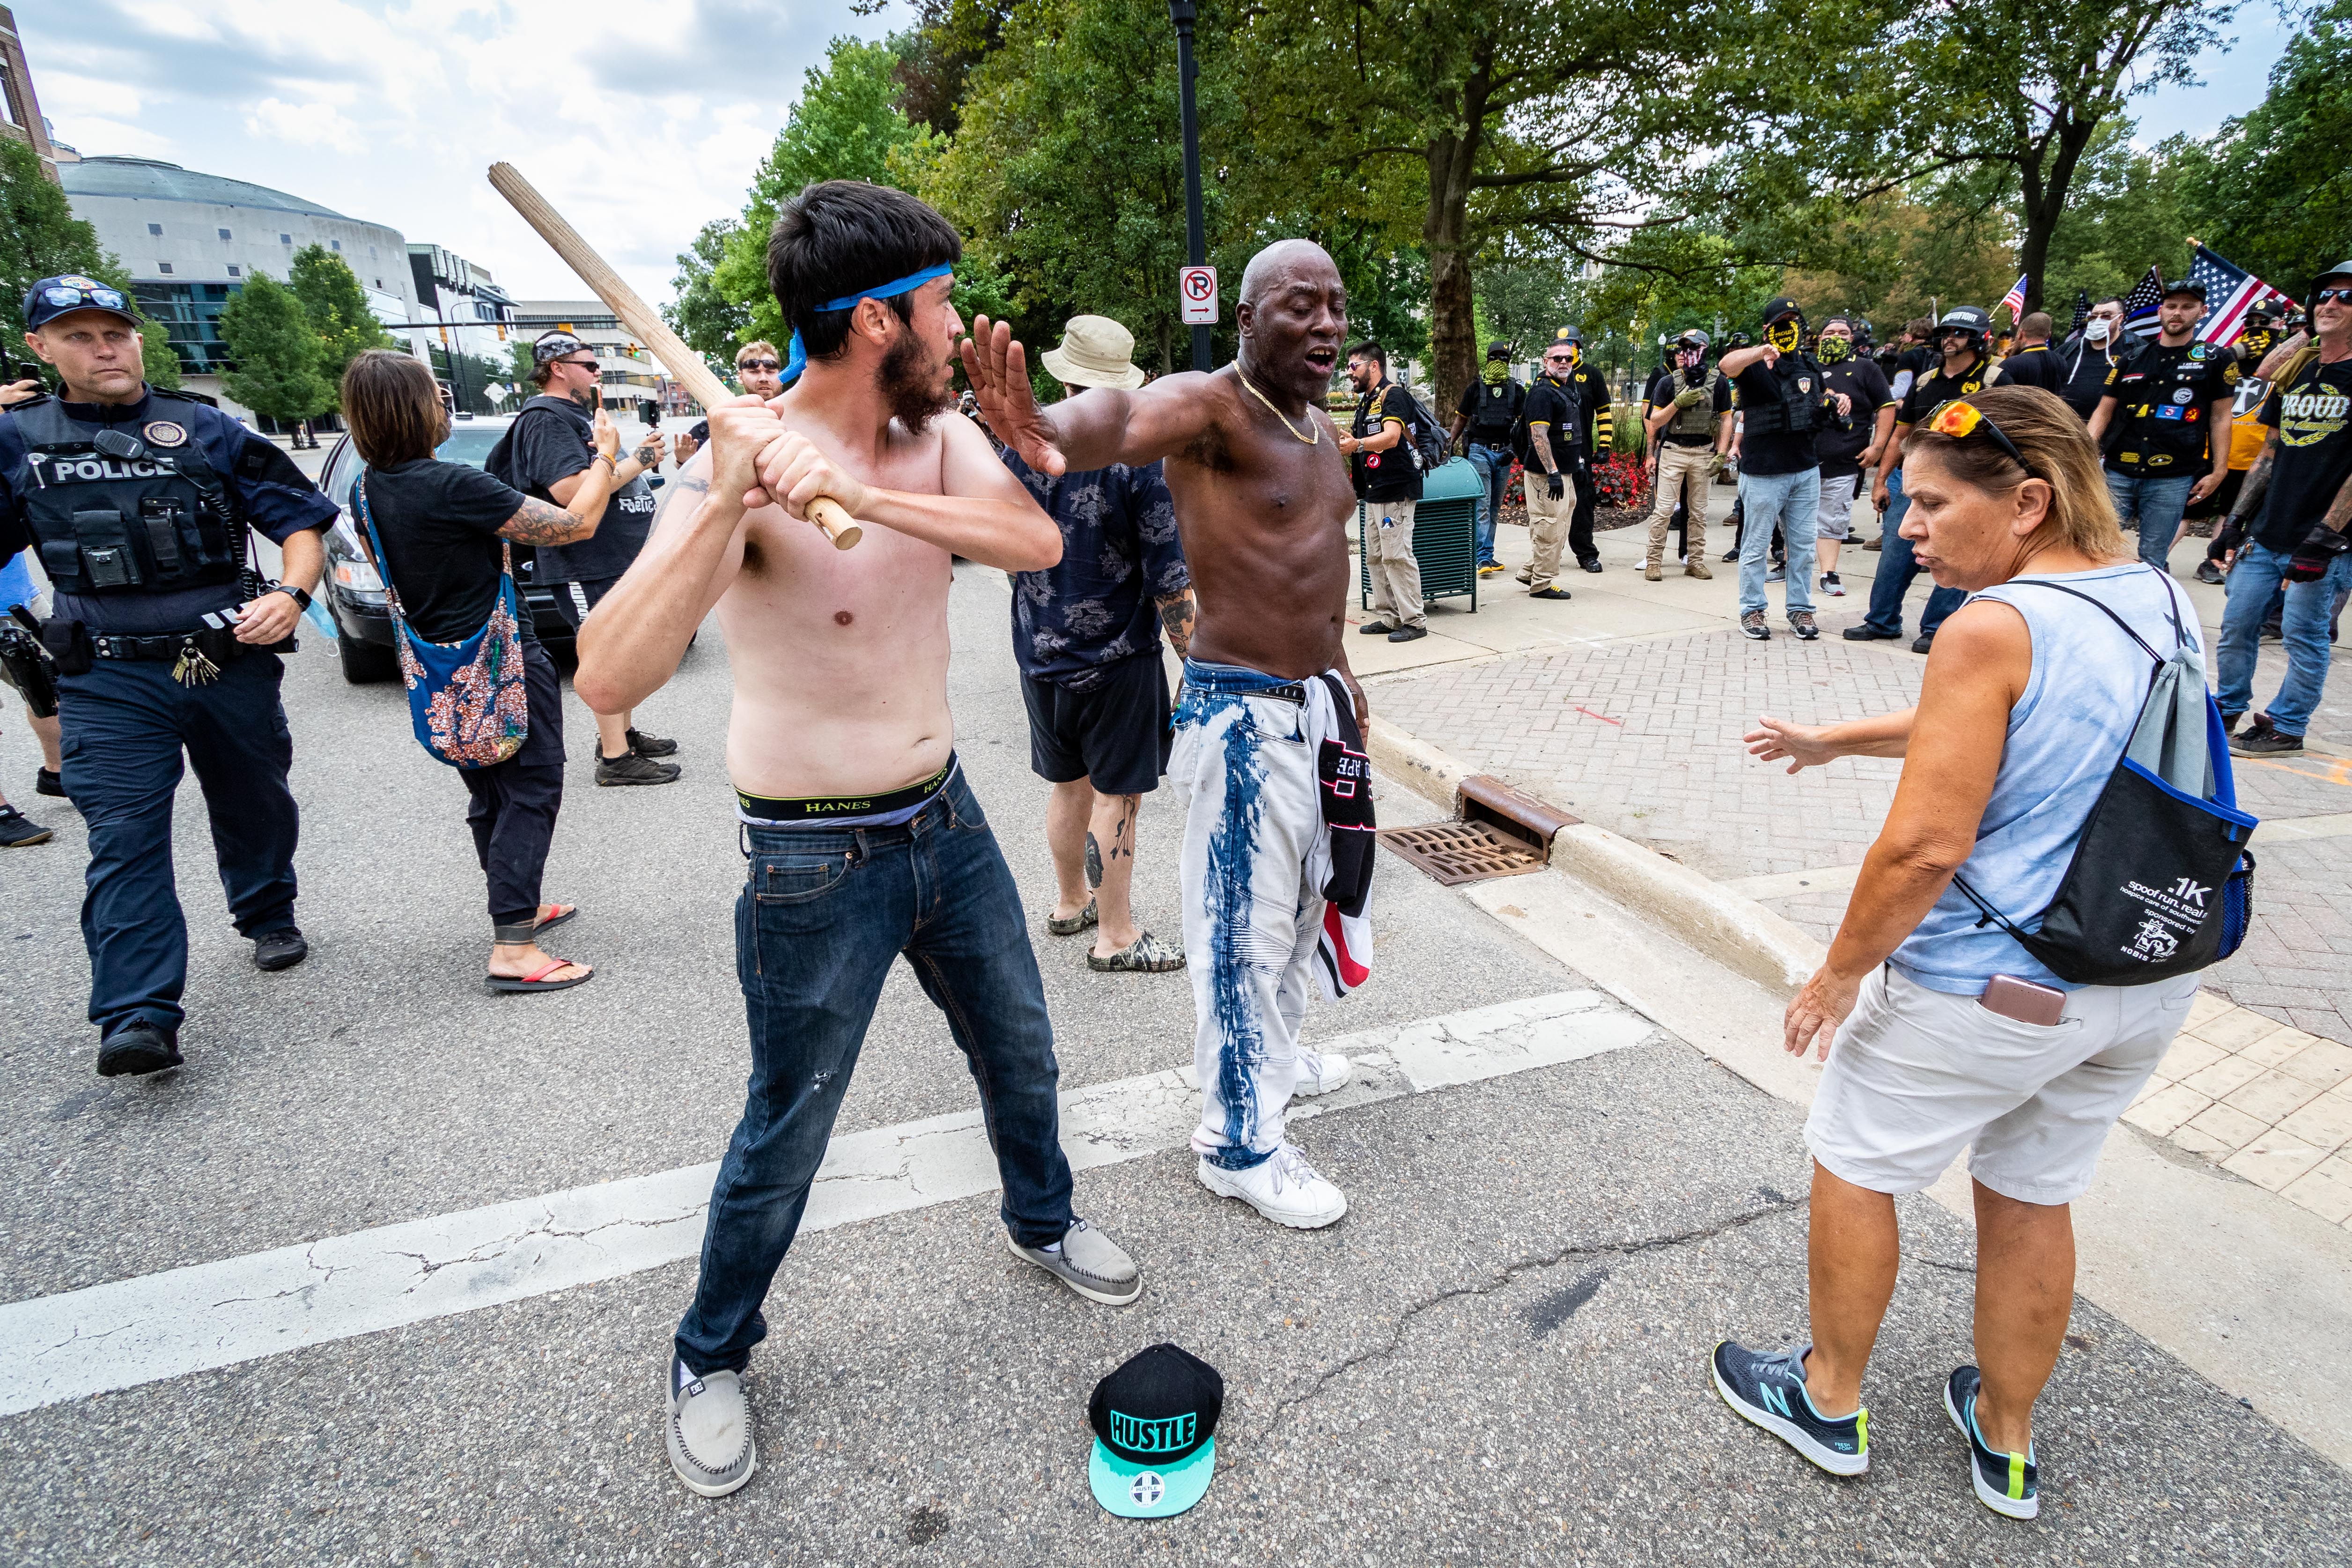 A counter-protester puts a hand up to stop a fellow counter protester from going after Proud Boys members with a stick during a skirmish at Bronson Park in Kalamazoo. Members of Proud Boys, antifa, and a local church clashed with each other and local and Michigan State Police at Arcadia Creek Festival Plaza in Kalamazoo, on Saturday, August 15, 2020.